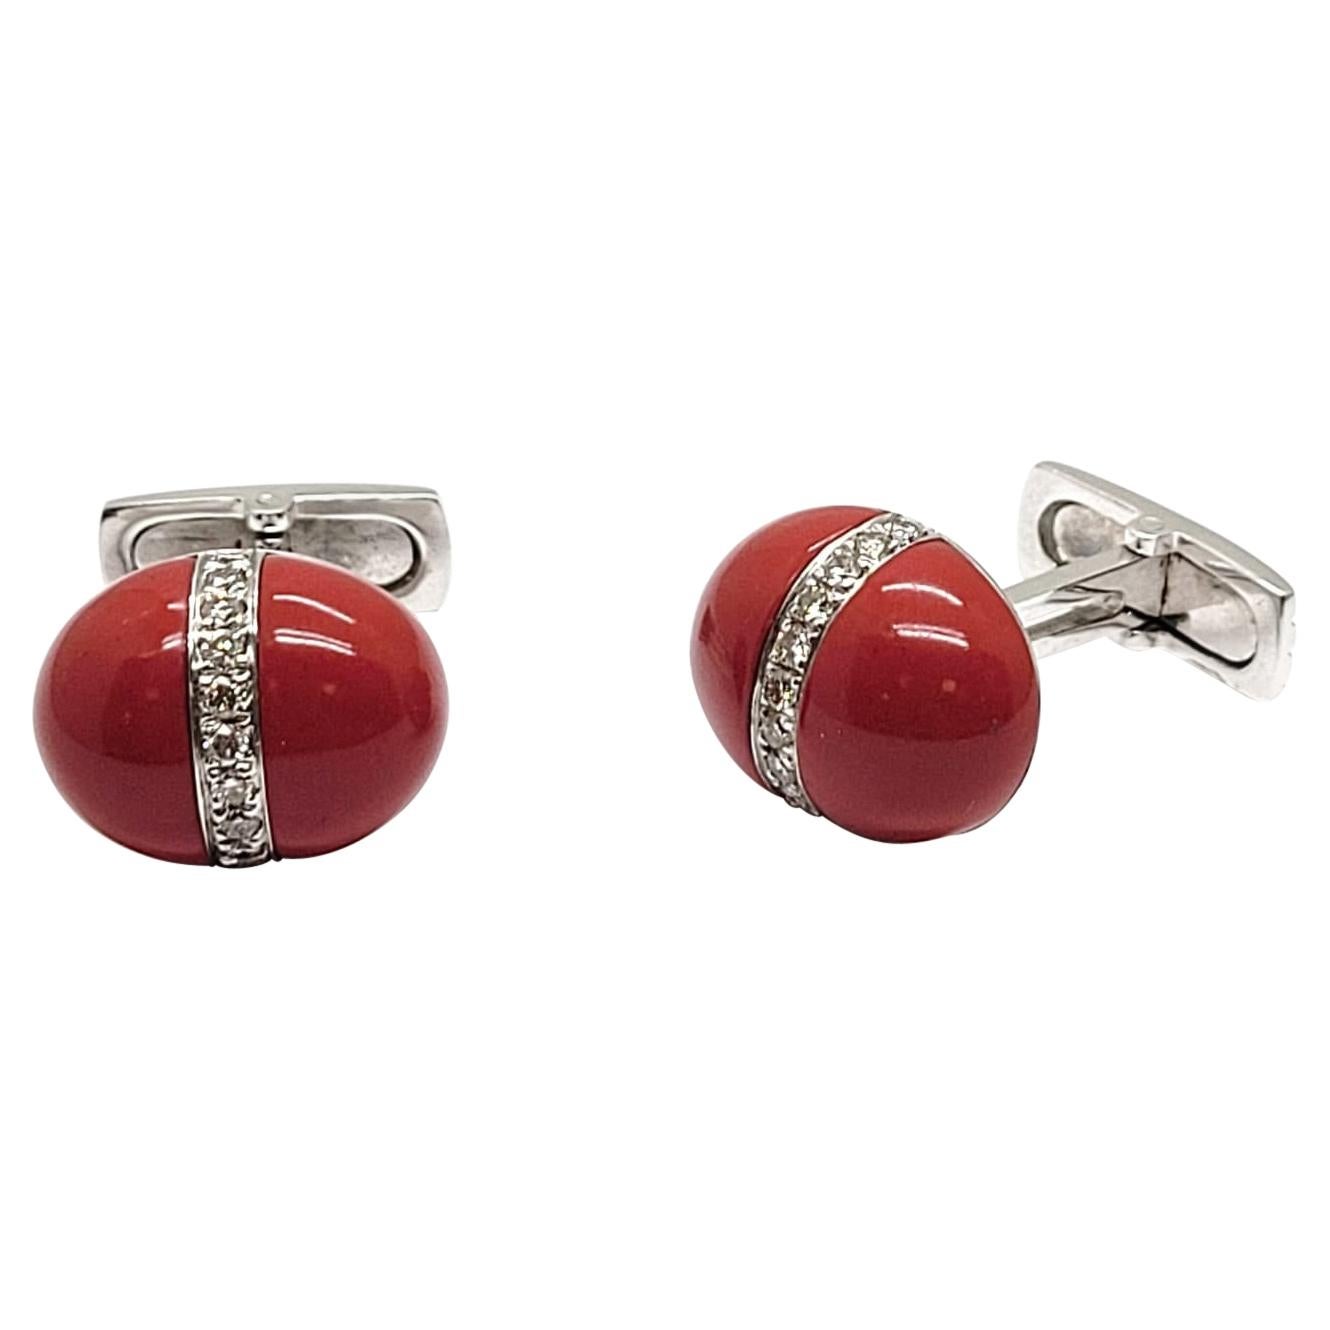 Andreoli 18k Gold Coral and Diamond Cufflinks